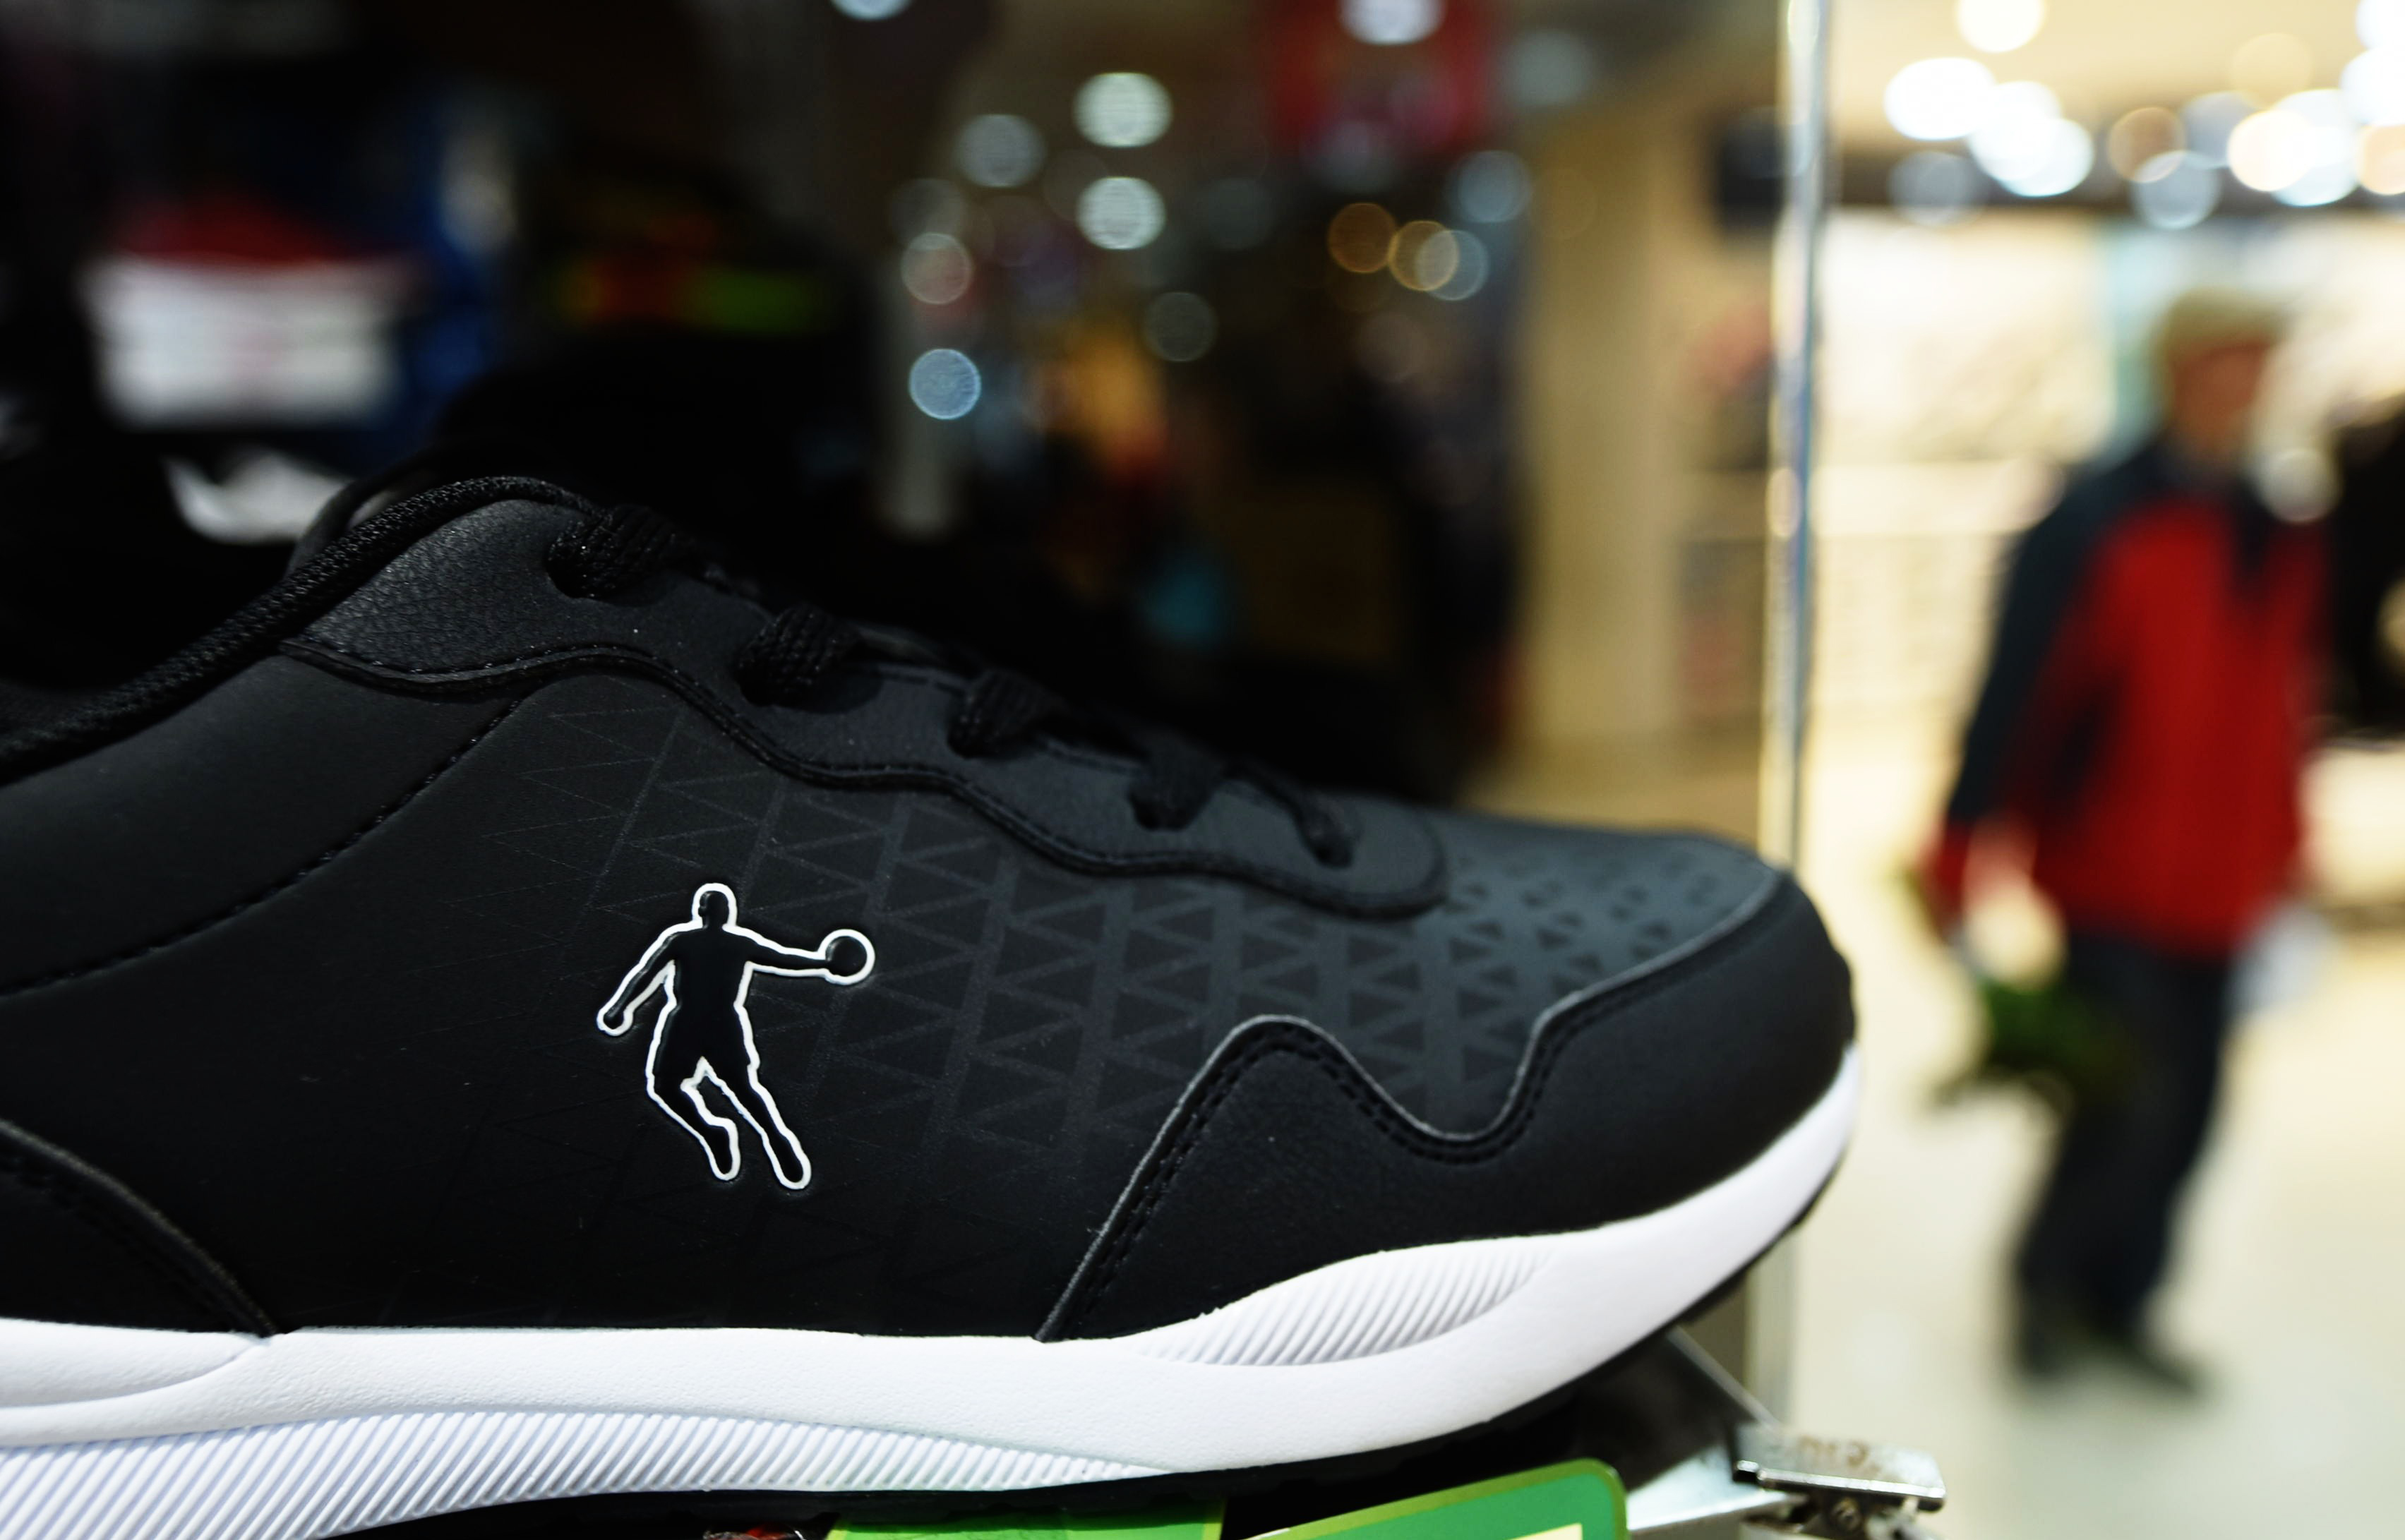 A Qiaodan brand shoe is displayed at a Qiaodan store in Hangzhou in China's Zhejiang province on December 8, 2016.  Basketball mega-star Michael Jordan won part of his trademark suit against a China-based sportswear company December 8, following a years-long struggle for control over the rights to his Chinese name. In a ruling by the Chinese Supreme Court, Qiaodan Sports Co,  based in southeastern Fujian province, must stop using the Chinese characters "Qiaodan" on its merchandise, according to a transcript of court records posted on an official website.  / AFP PHOTO / STR / China OUT